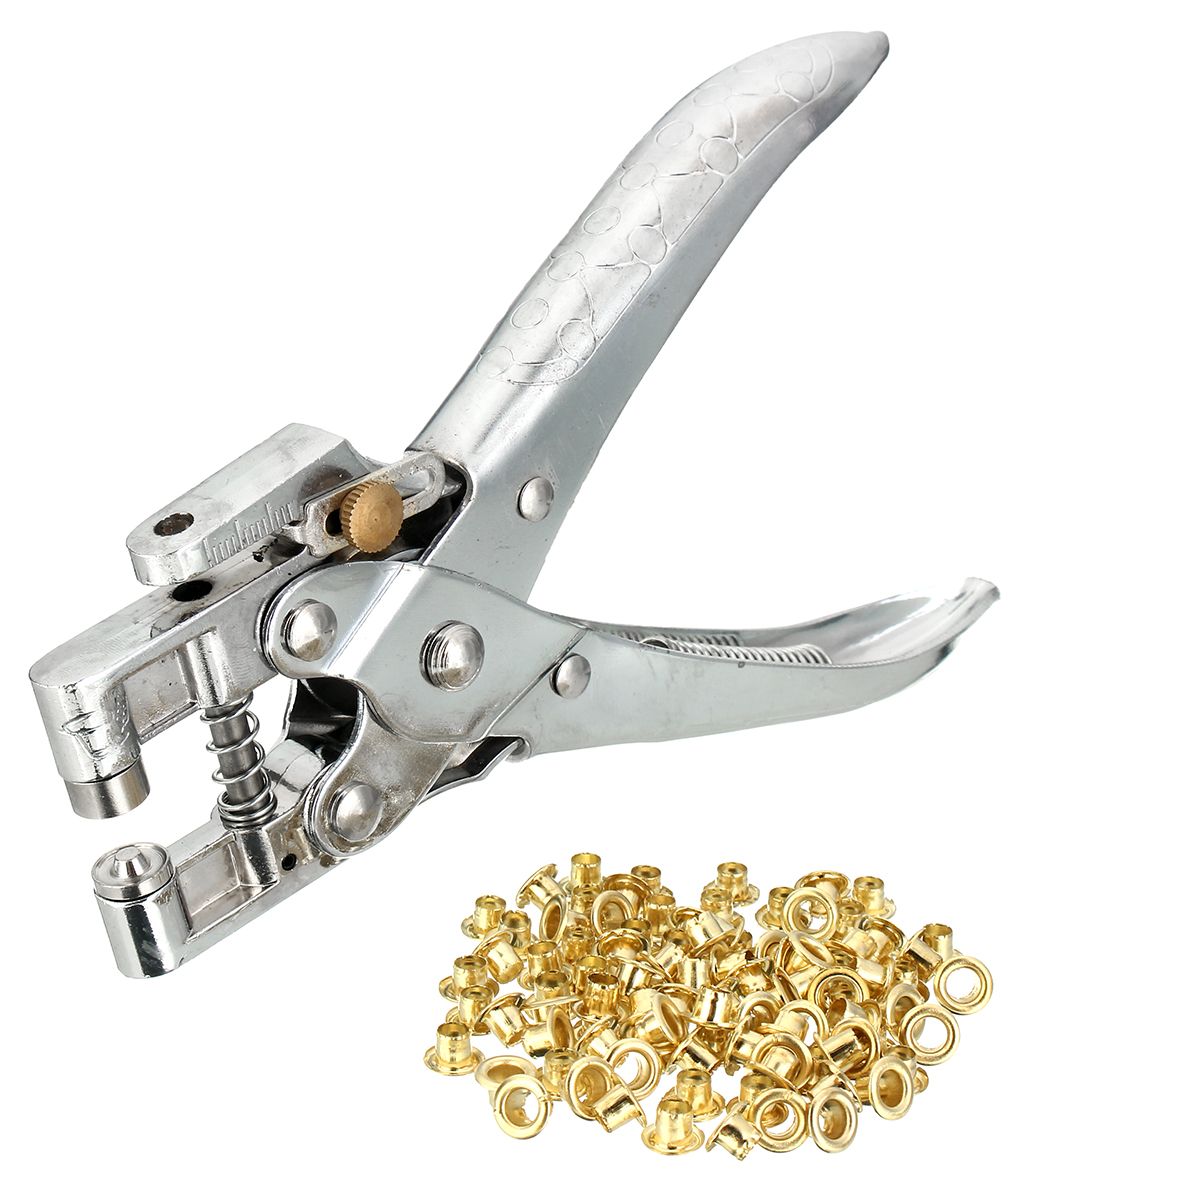 6-Inch-Eyelet-Grommet-Setter-Hole-Punch-Pliers-Steel-Fabric-Canvas-Repair-Tool-Kits-1143733